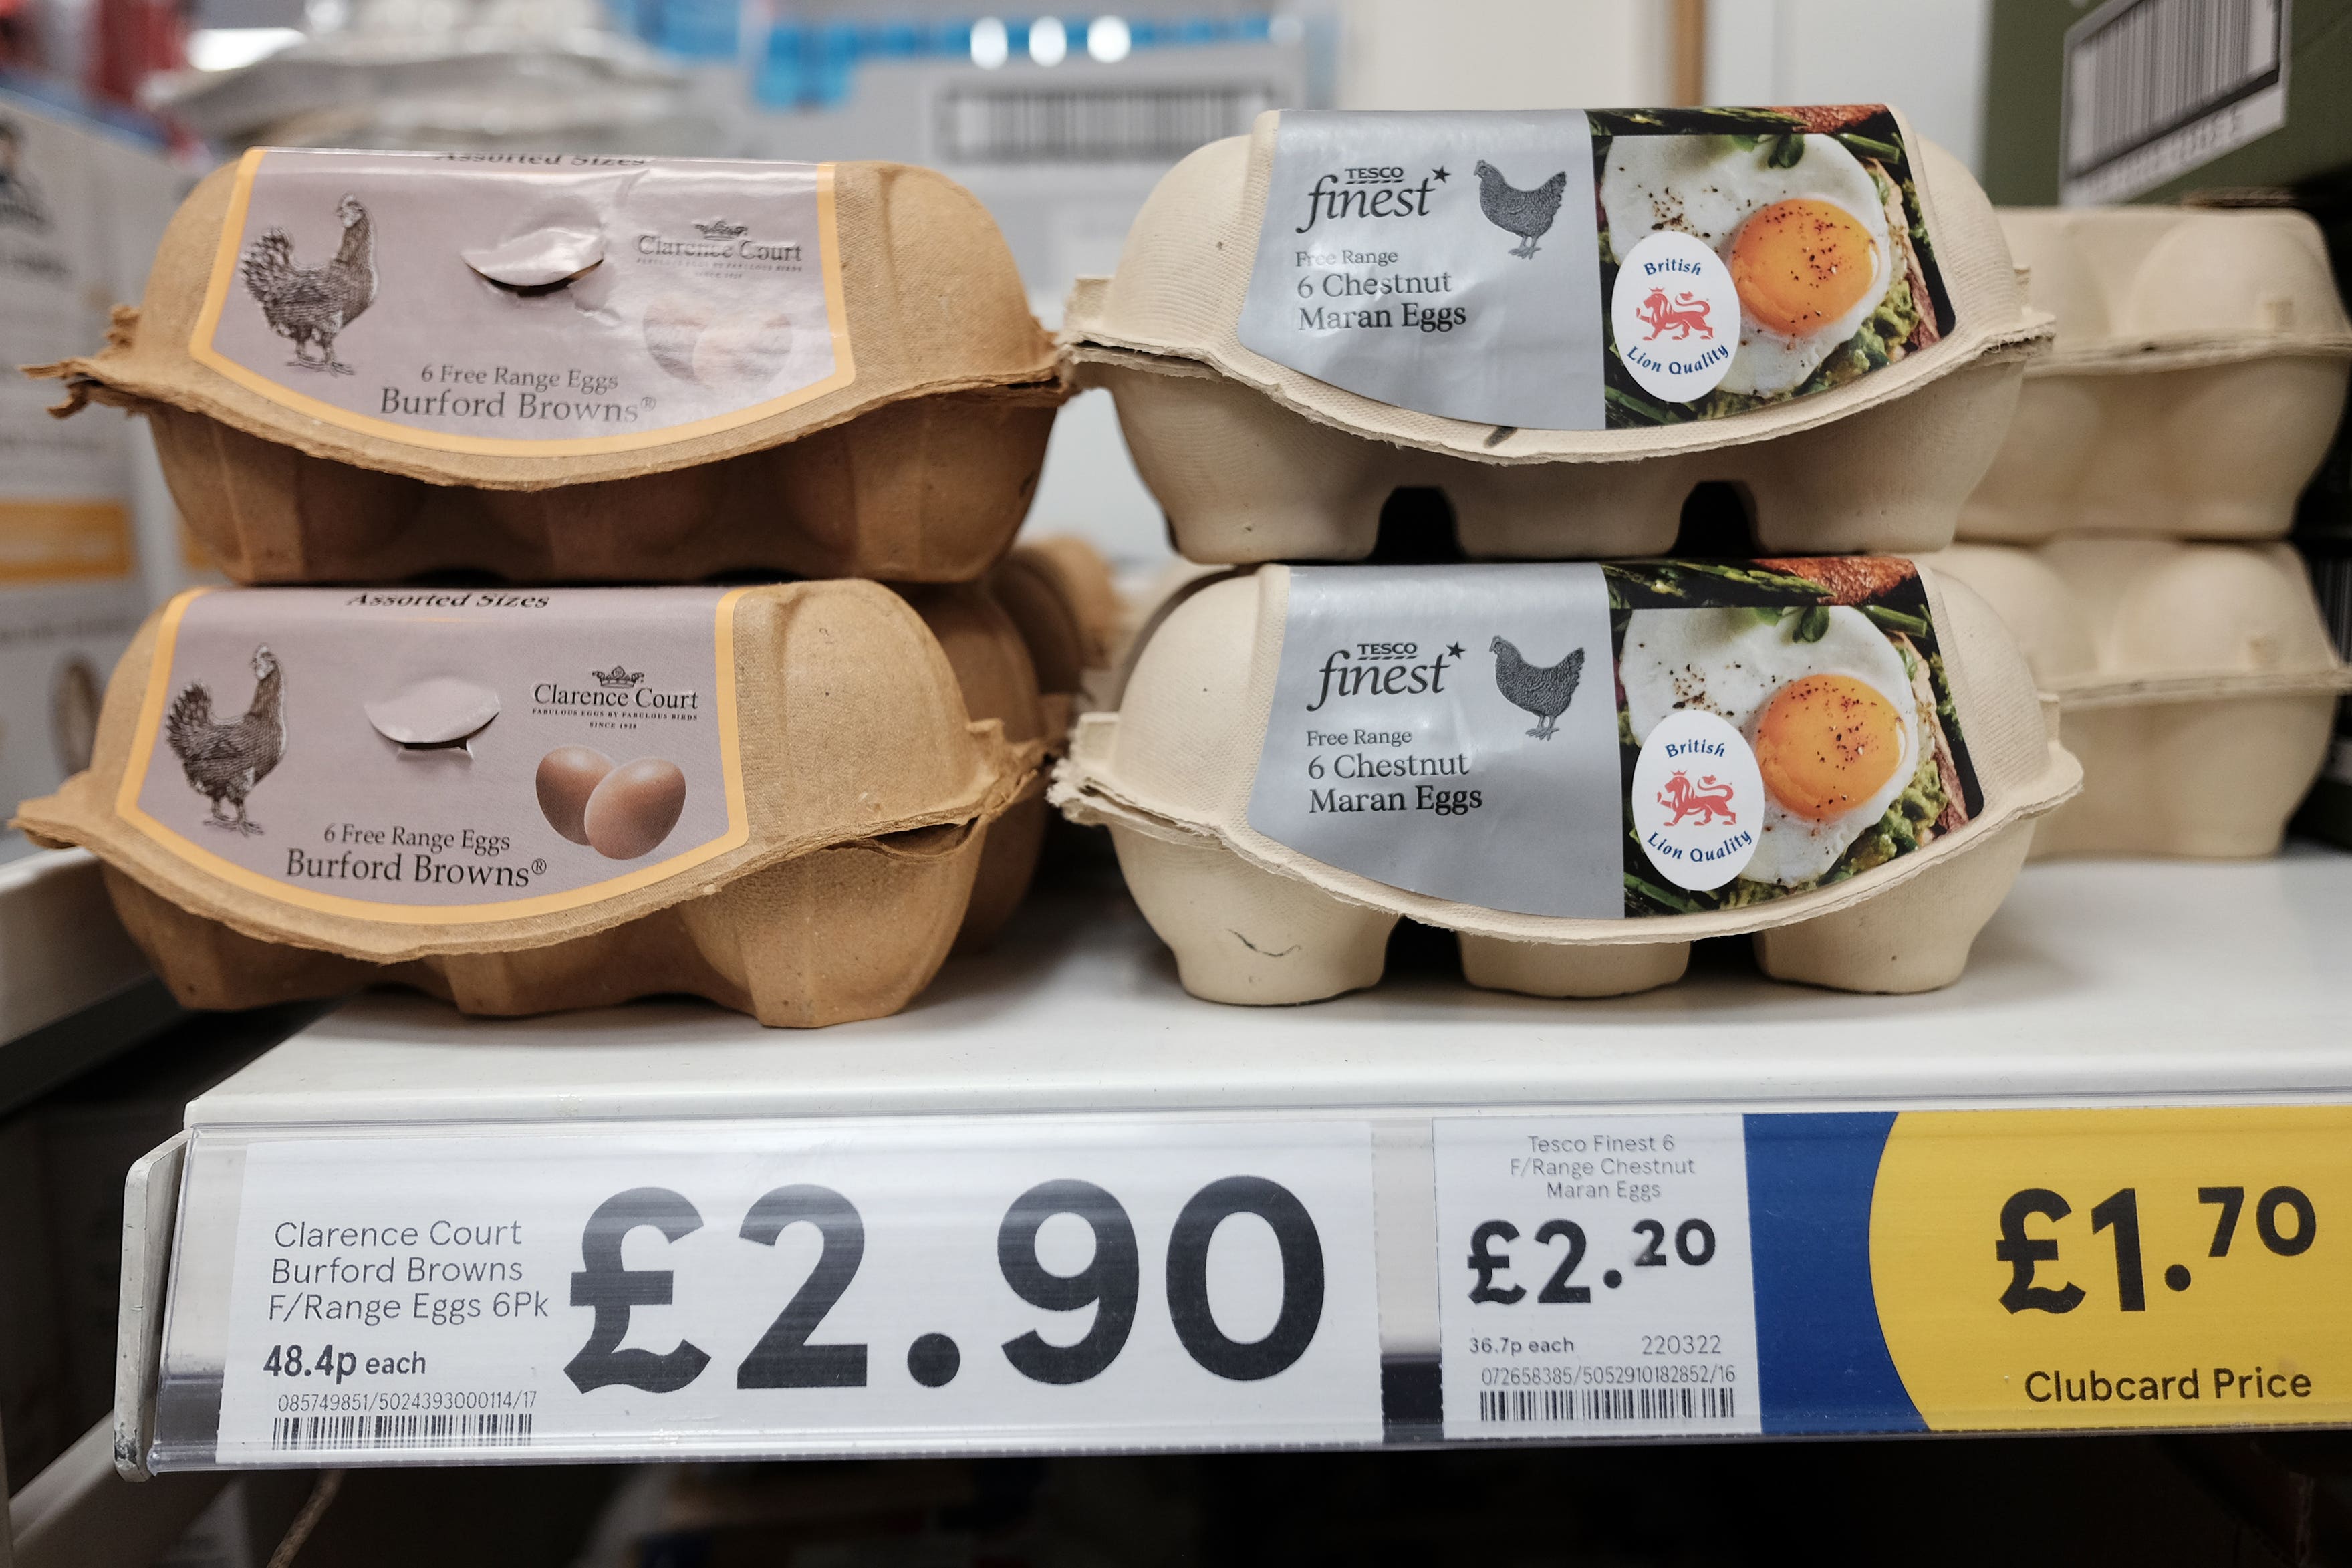 The Competition and Markets Authority is reviewing whether supermarket loyalty pricing misleads or disadvantages shoppers